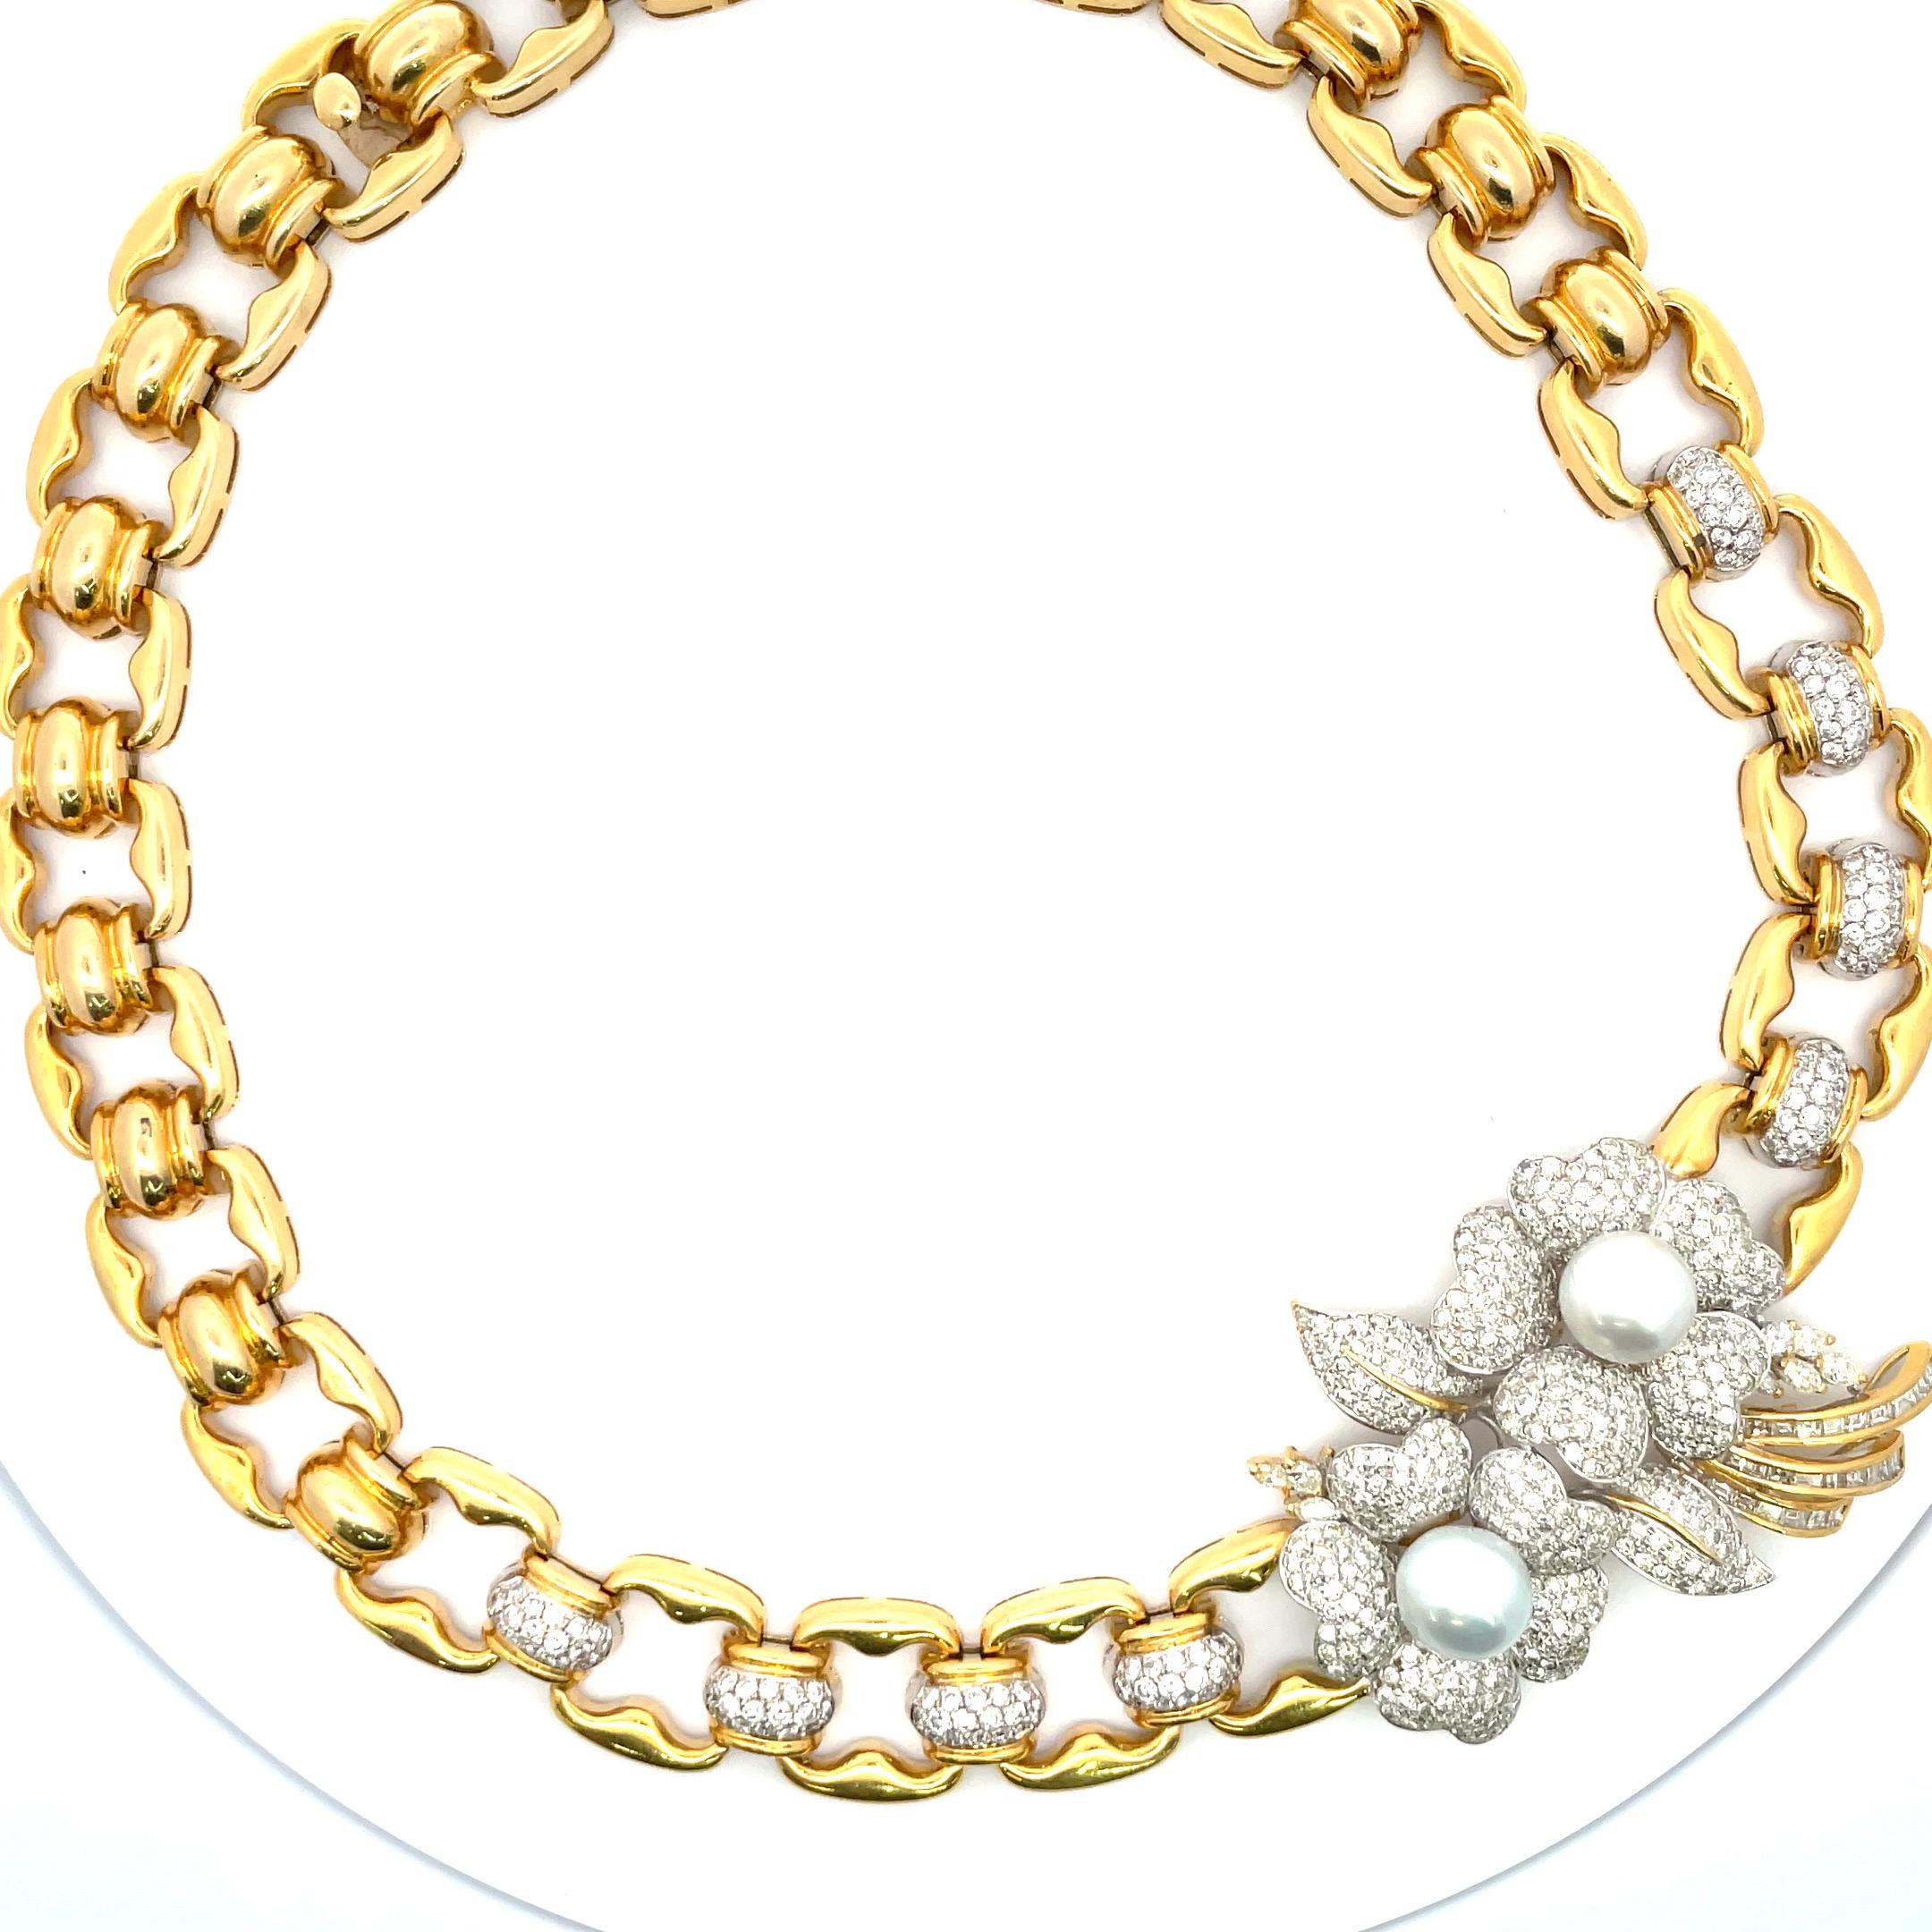 Pearl Floral Diamond Link Necklace 11.50 Carats 18 Karat Yellow Gold For Sale 3